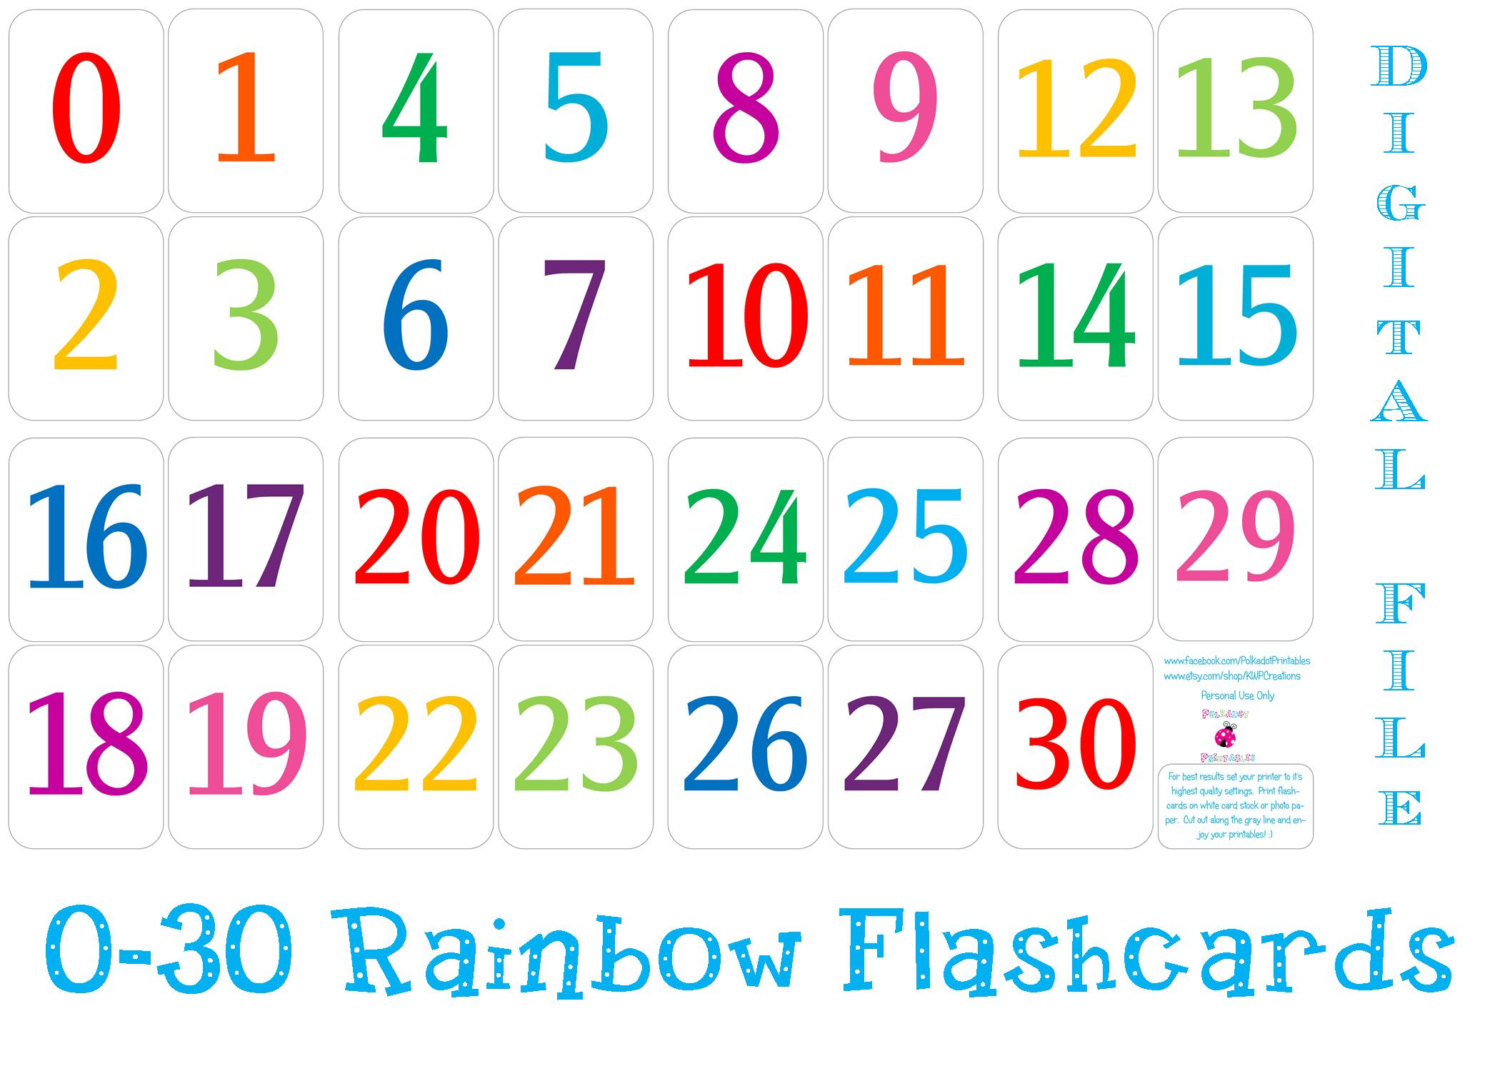 5-best-images-of-printable-number-cards-to-50-printable-number-flash-cards-1-10-free